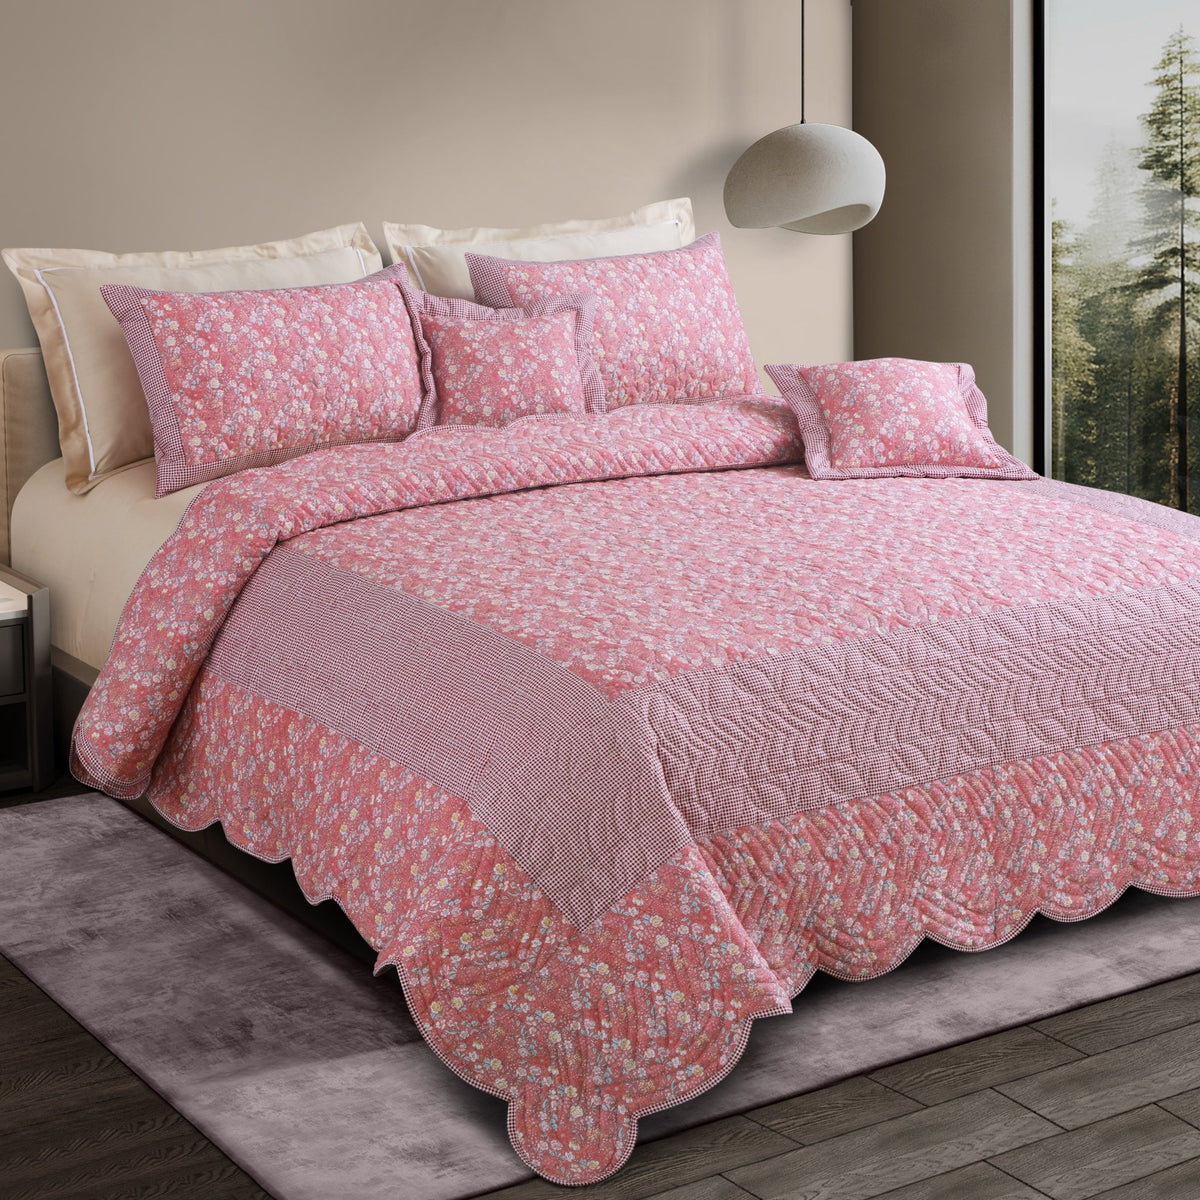 Malako Royale 100% Cotton Red Floral King Size 5 Piece Quilted Bedspread Set - MALAKO